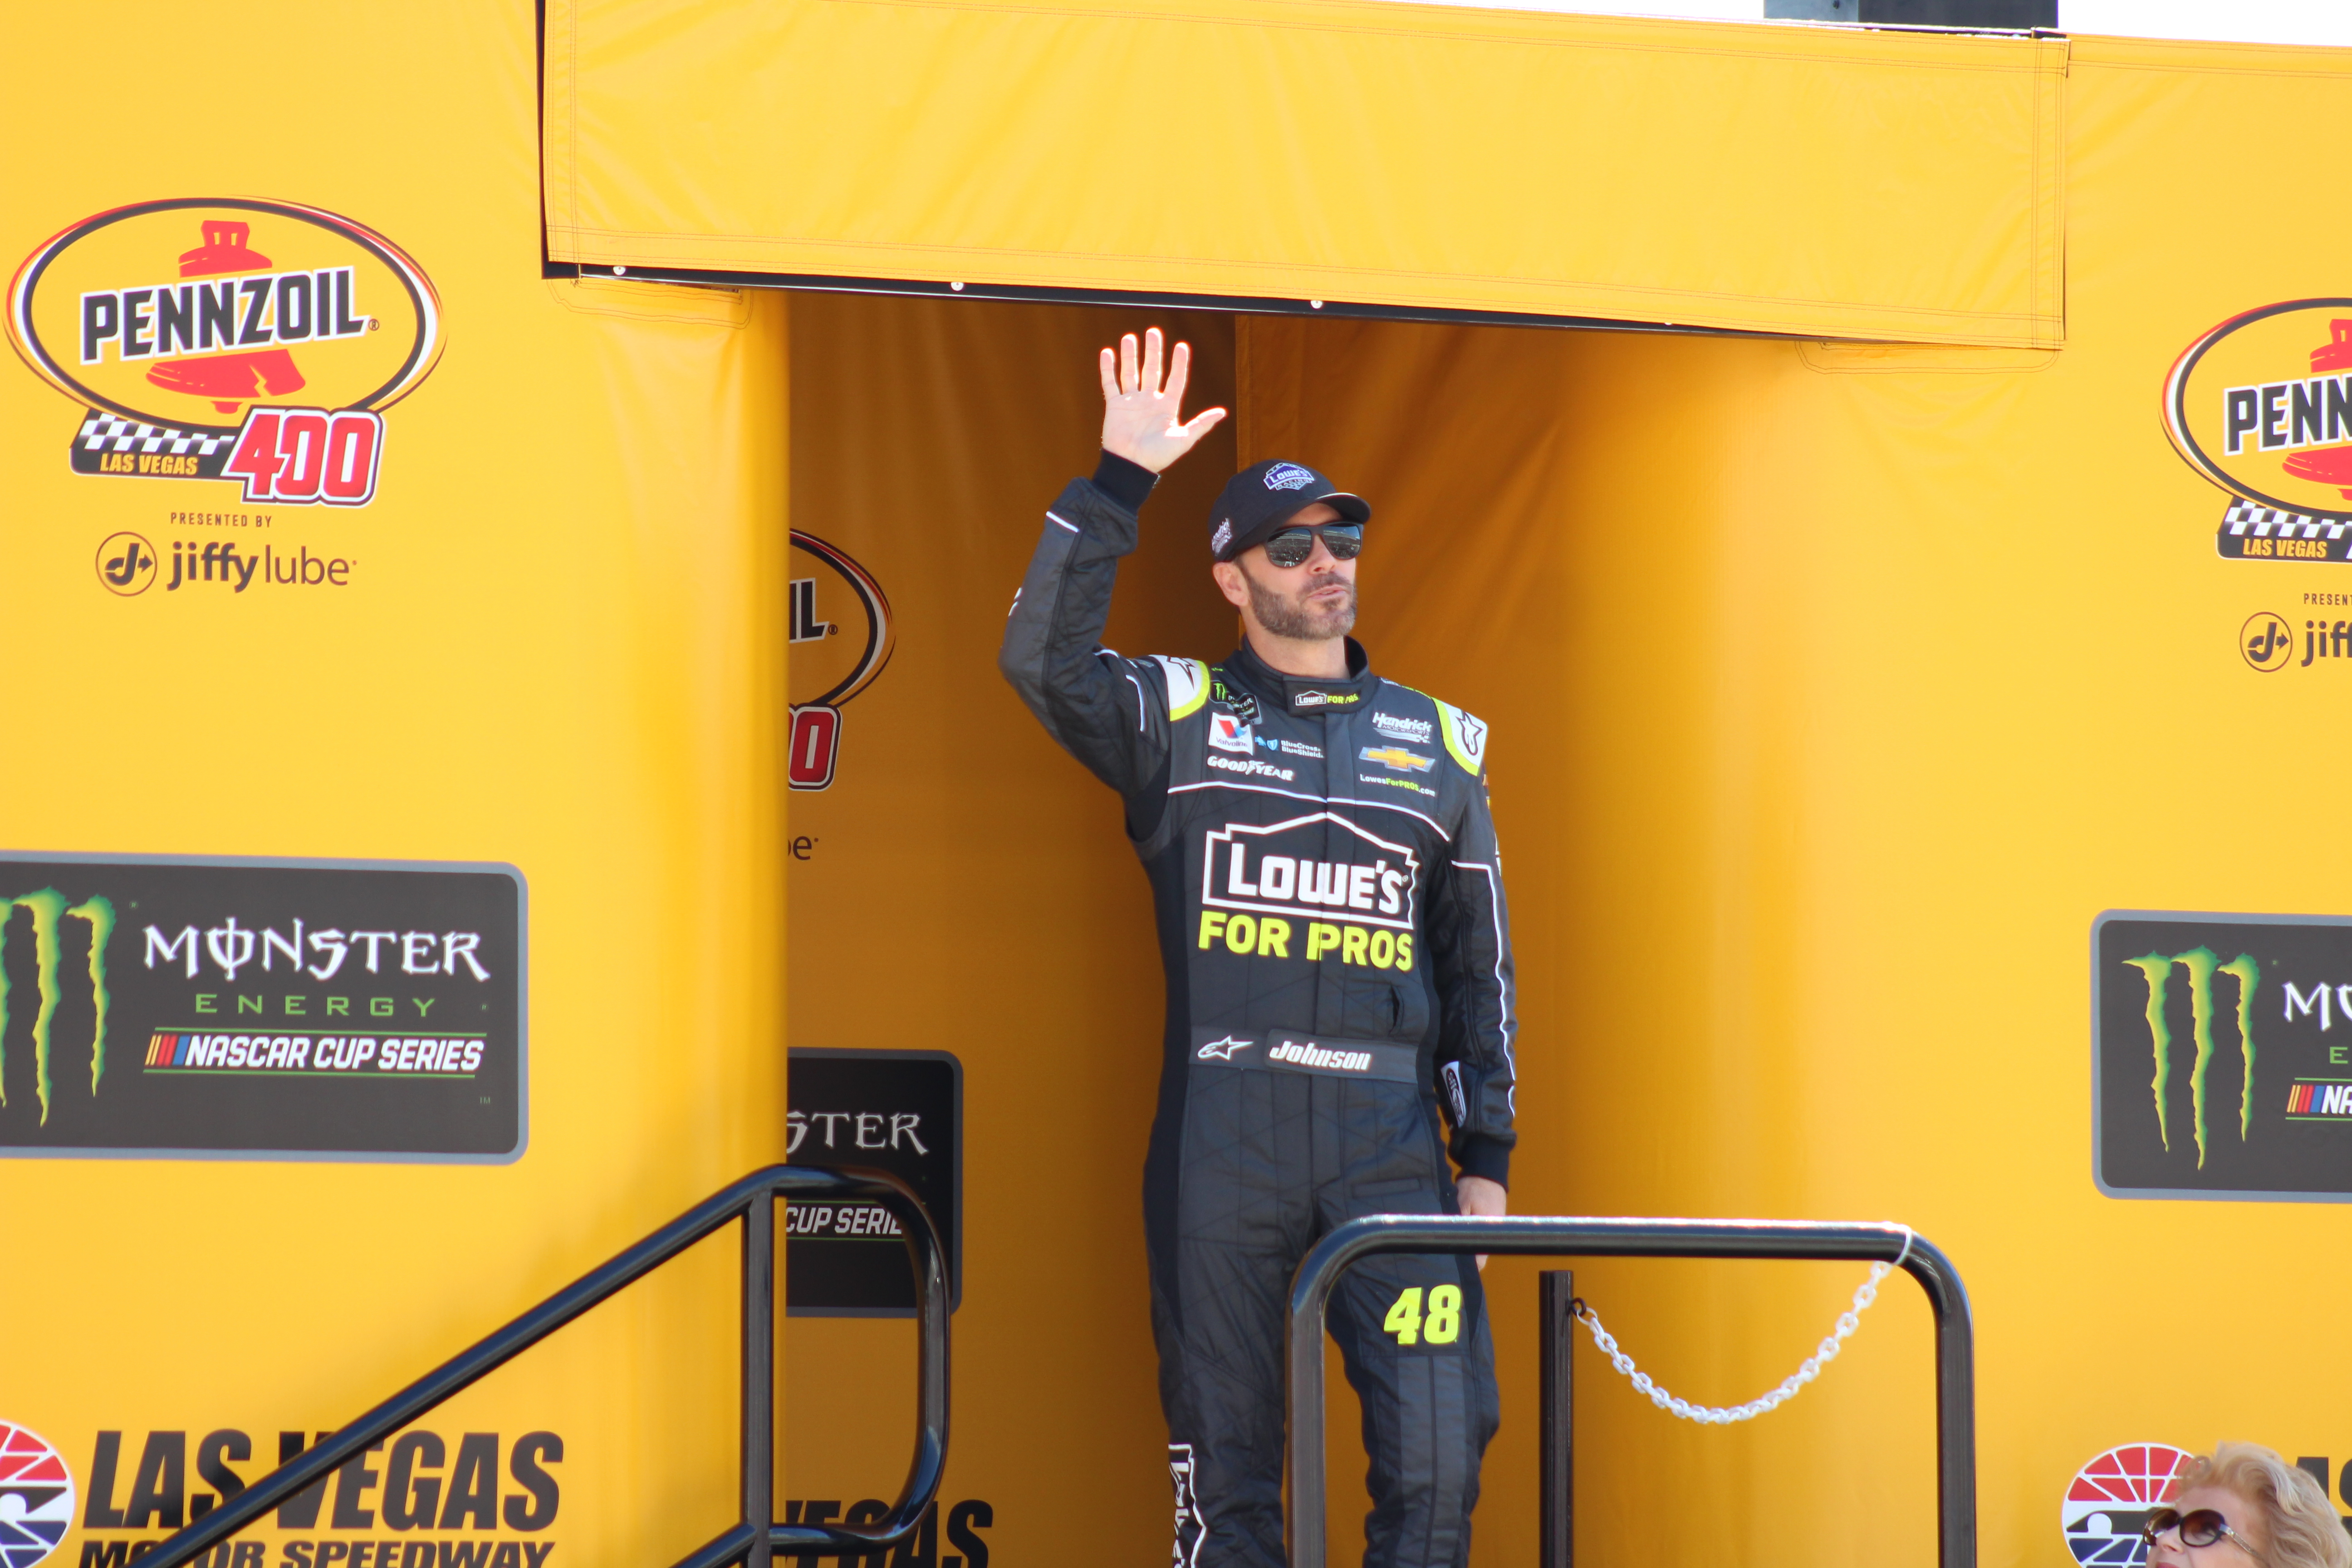 Raise your hands if you think Jimmie Johnson is a Busch Pole Award winner on Saturday. (Photo Credit: Jose L. Acero, Jr./TPF)